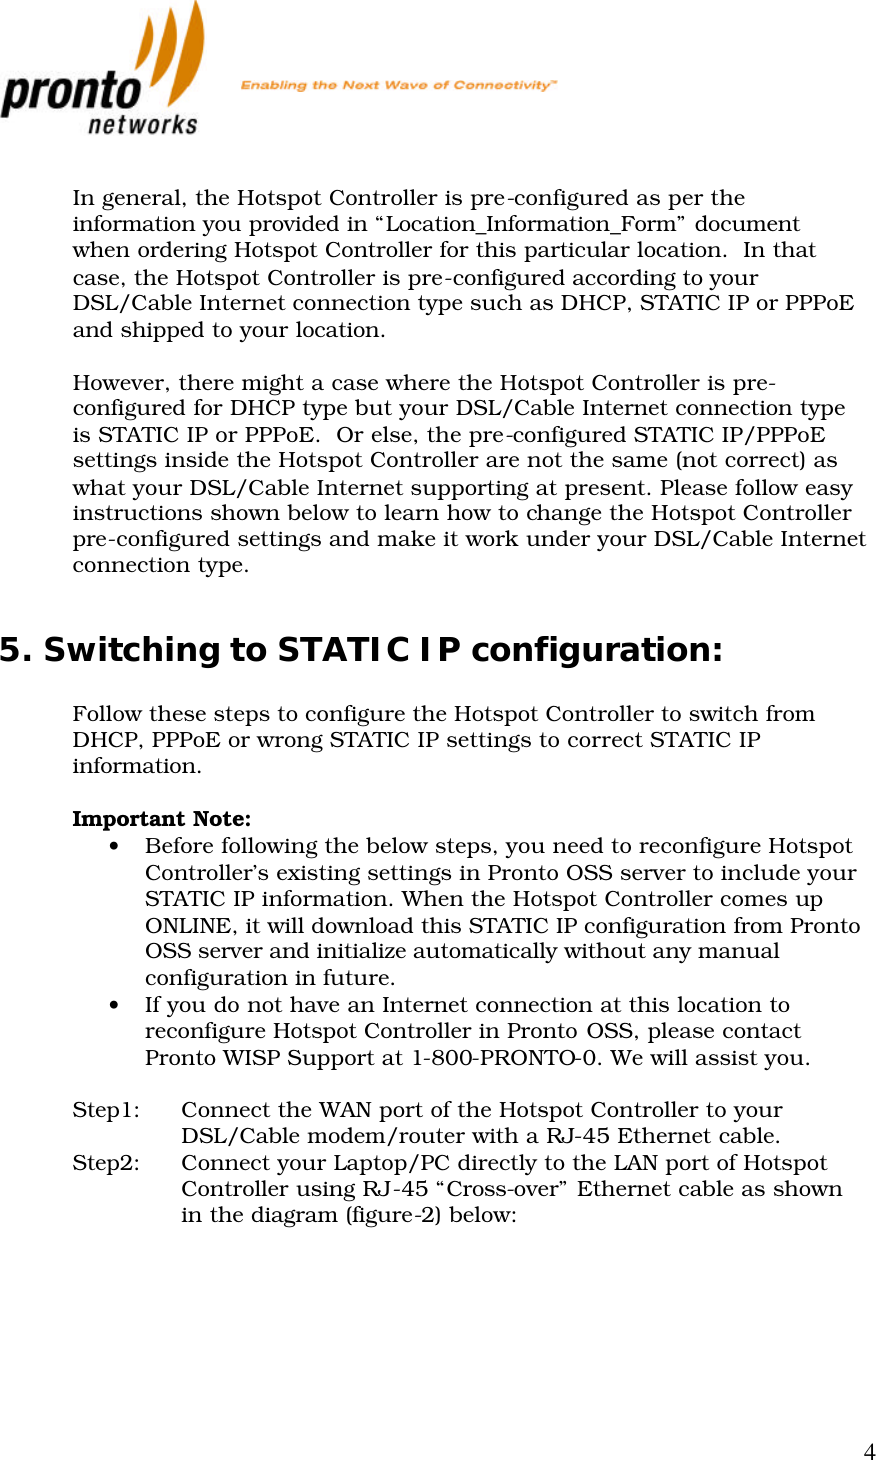           4  In general, the Hotspot Controller is pre-configured as per the information you provided in “Location_Information_Form” document when ordering Hotspot Controller for this particular location.  In that case, the Hotspot Controller is pre-configured according to your DSL/Cable Internet connection type such as DHCP, STATIC IP or PPPoE and shipped to your location.   However, there might a case where the Hotspot Controller is pre-configured for DHCP type but your DSL/Cable Internet connection type is STATIC IP or PPPoE.  Or else, the pre-configured STATIC IP/PPPoE settings inside the Hotspot Controller are not the same (not correct) as what your DSL/Cable Internet supporting at present. Please follow easy instructions shown below to learn how to change the Hotspot Controller pre-configured settings and make it work under your DSL/Cable Internet connection type.  5. Switching to STATIC IP configuration:  Follow these steps to configure the Hotspot Controller to switch from DHCP, PPPoE or wrong STATIC IP settings to correct STATIC IP information.  Important Note:  • Before following the below steps, you need to reconfigure Hotspot Controller’s existing settings in Pronto OSS server to include your STATIC IP information. When the Hotspot Controller comes up ONLINE, it will download this STATIC IP configuration from Pronto OSS server and initialize automatically without any manual configuration in future. • If you do not have an Internet connection at this location to reconfigure Hotspot Controller in Pronto OSS, please contact Pronto WISP Support at 1-800-PRONTO-0. We will assist you.  Step1: Connect the WAN port of the Hotspot Controller to your DSL/Cable modem/router with a RJ-45 Ethernet cable. Step2: Connect your Laptop/PC directly to the LAN port of Hotspot Controller using RJ-45 “Cross-over” Ethernet cable as shown in the diagram (figure-2) below:     